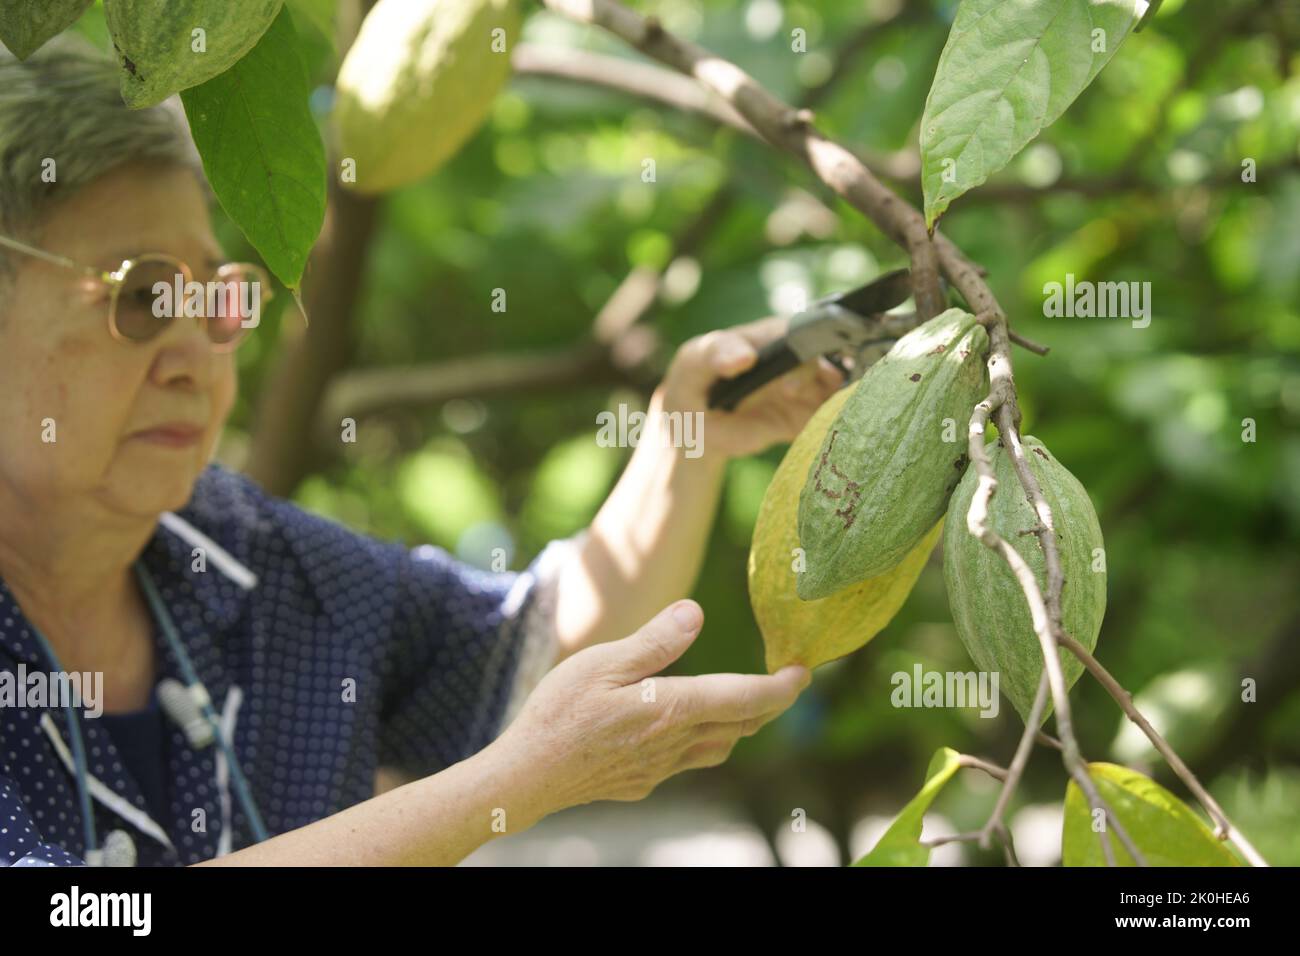 farmer use pruning shear to harvest cacao bean fruit cocoa pod from tree Stock Photo